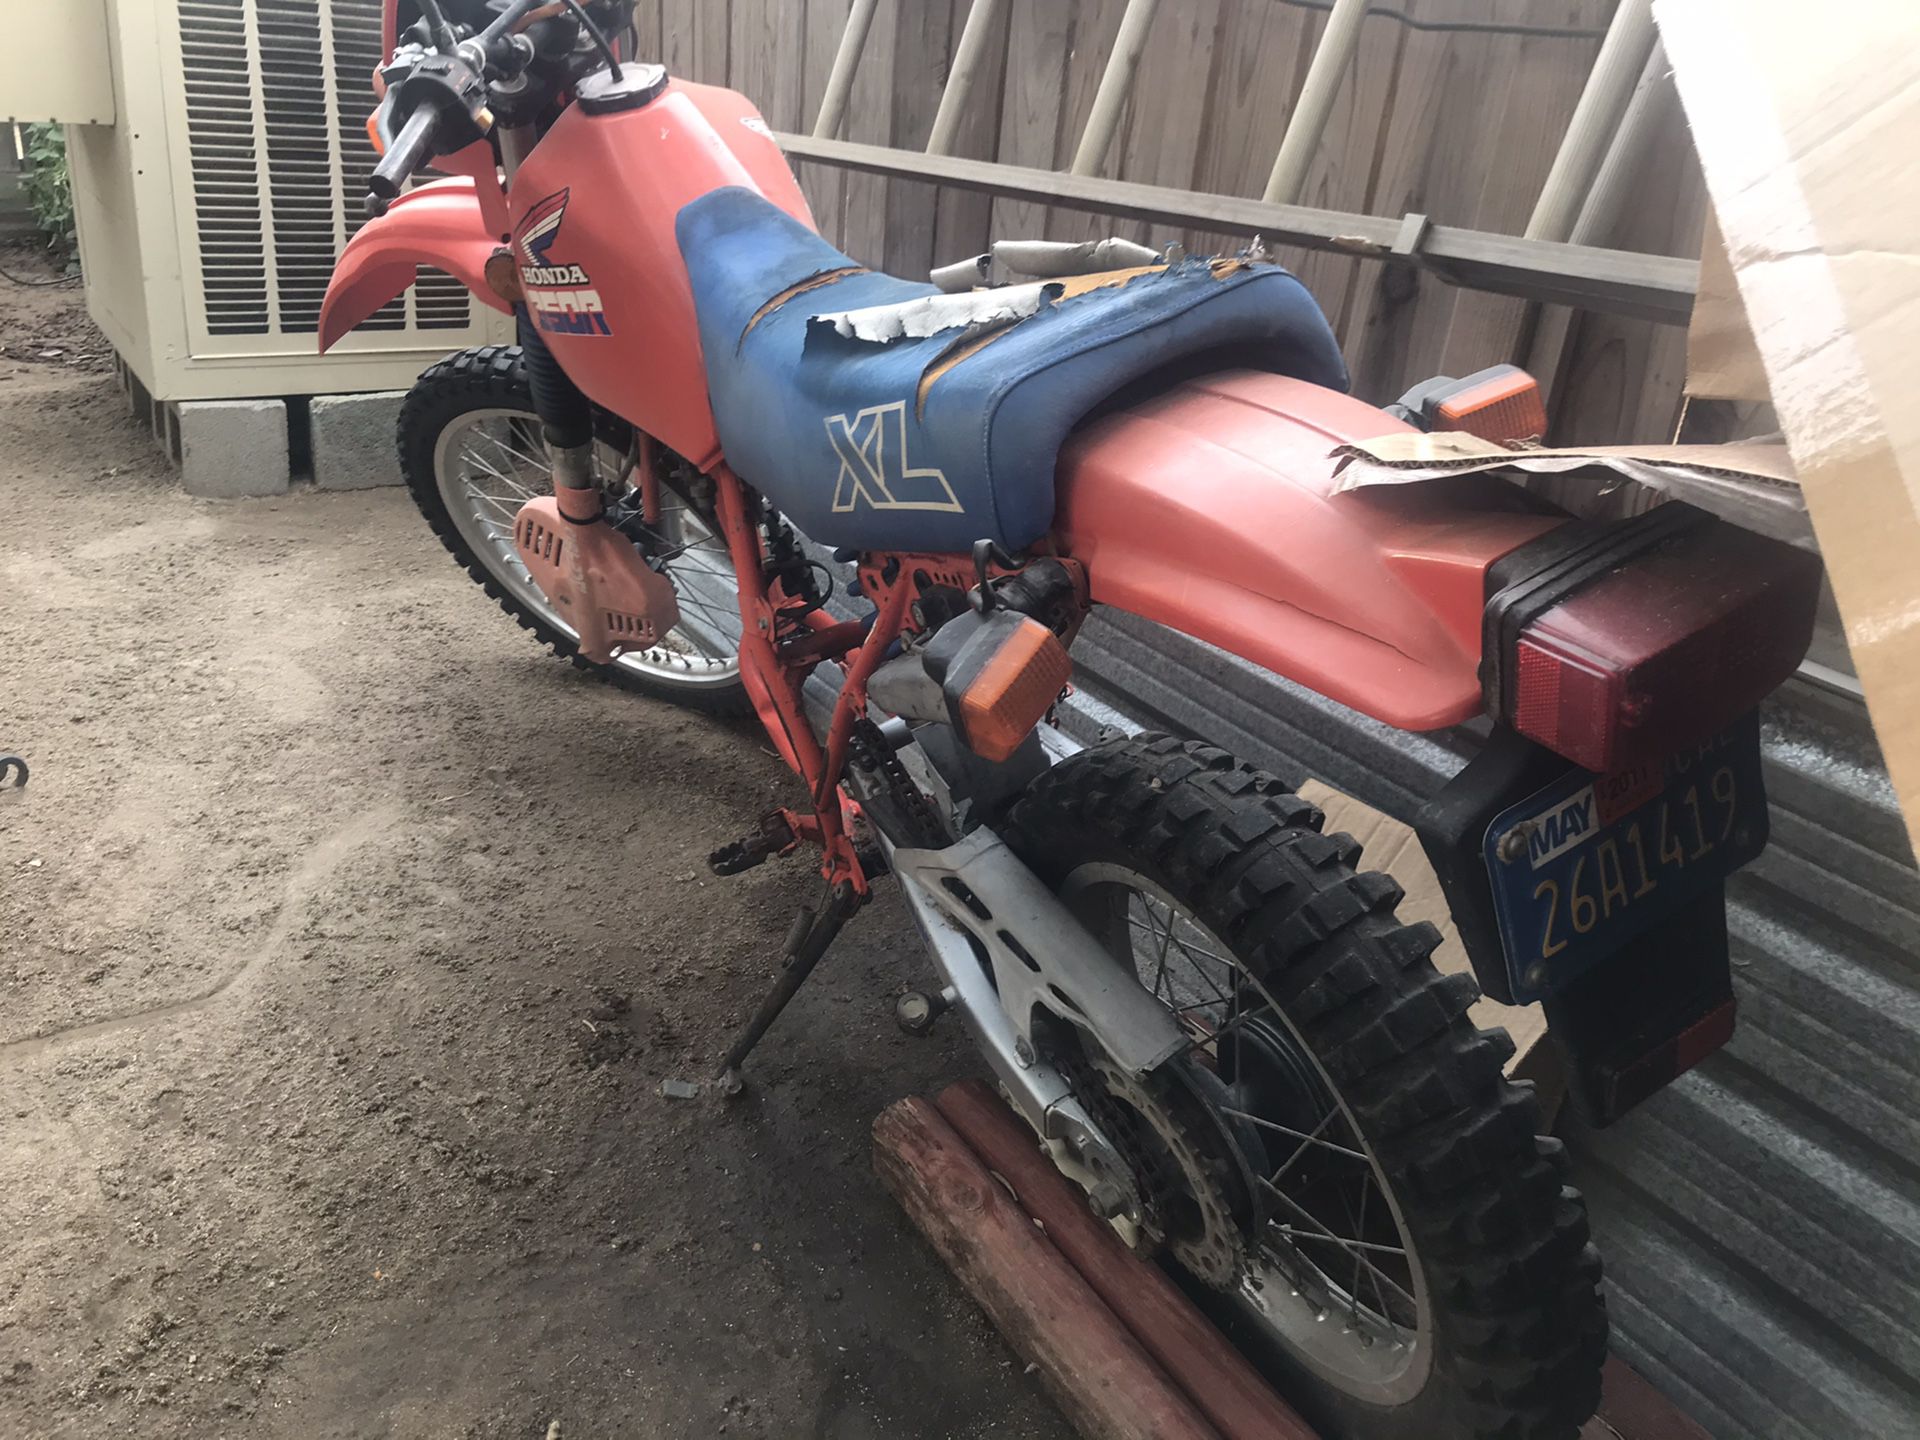 1986 Honda Xl dirt bike everything u see in the pics are intakes except the motor I have no paper wrk on the bike it was a family members I have no